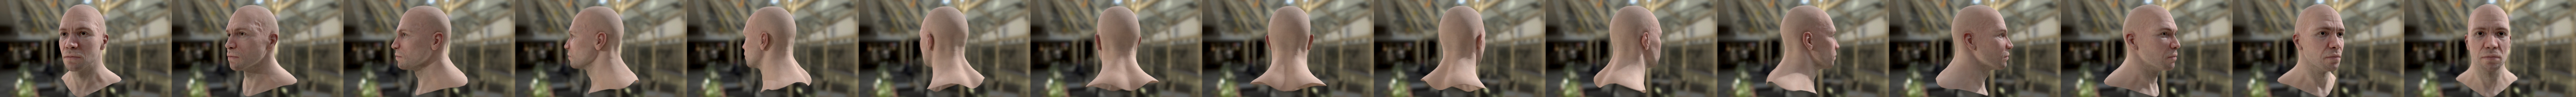 Male face - Buy Royalty Free 3D model by Tom Hodes (@tomhodes) [1bf3446]